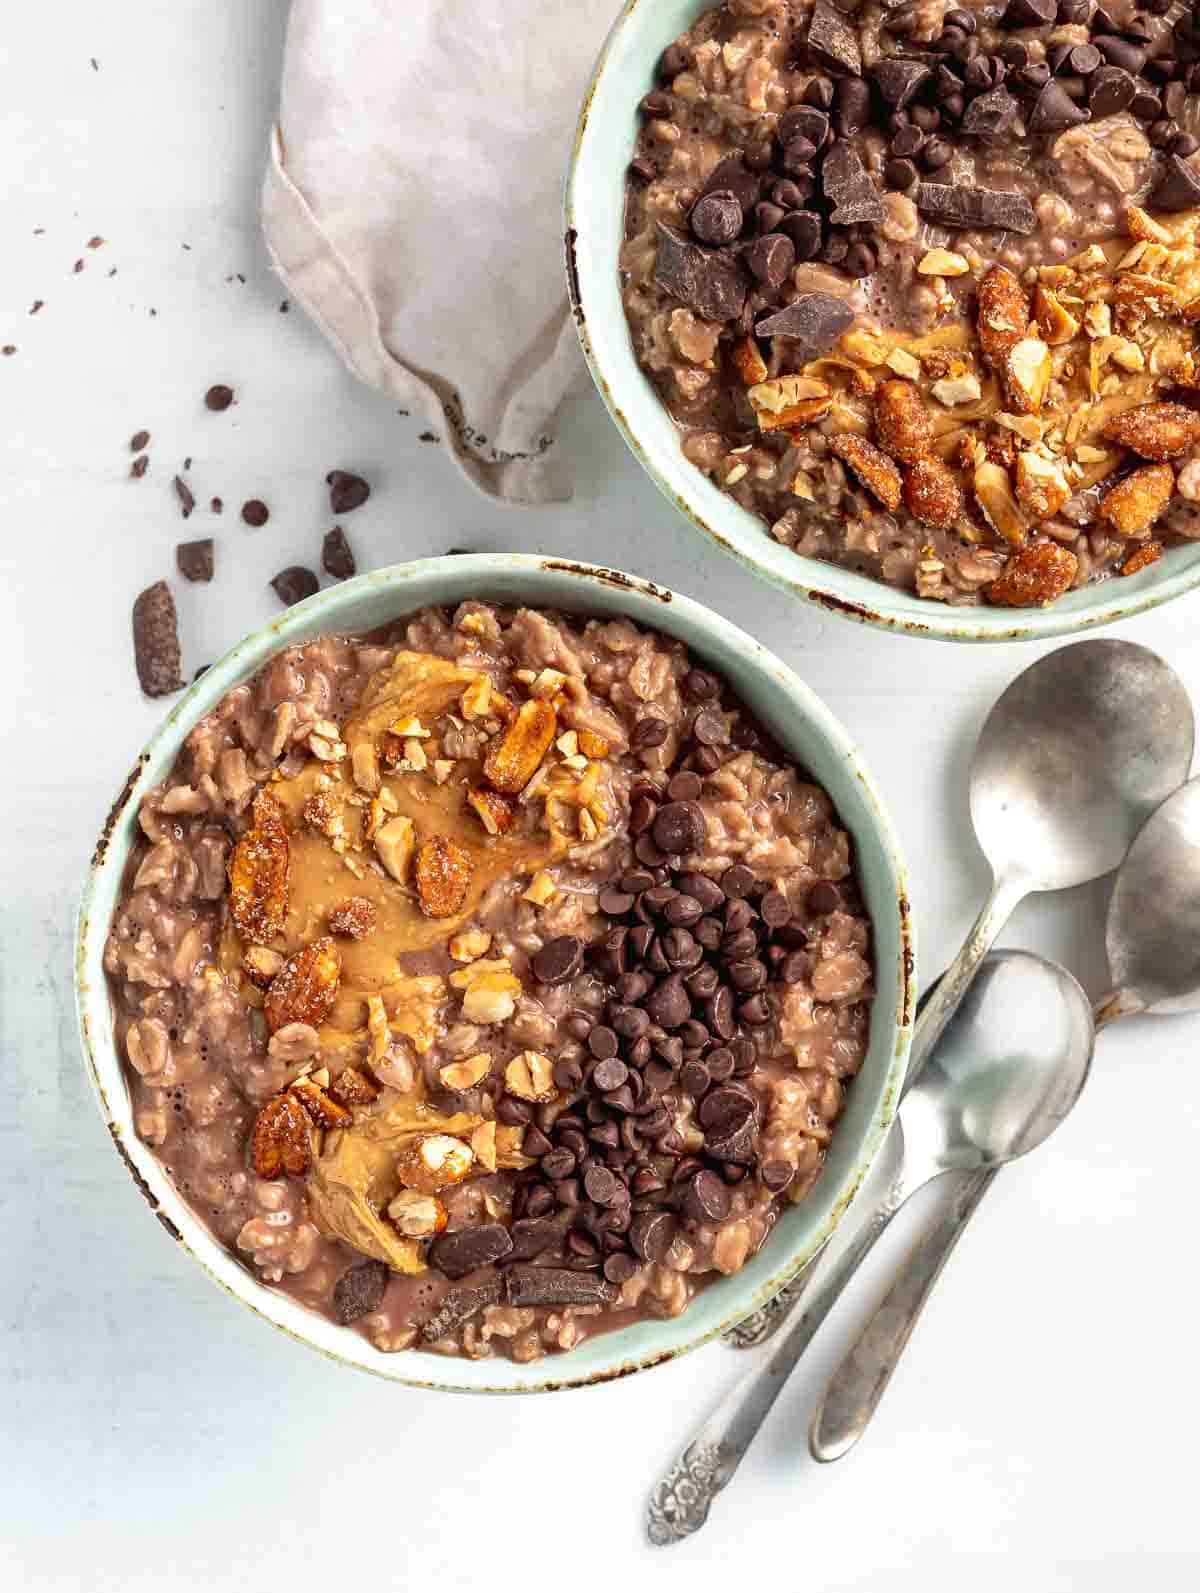 two chocolate bowls of oats topping with nuts and chocolate chips